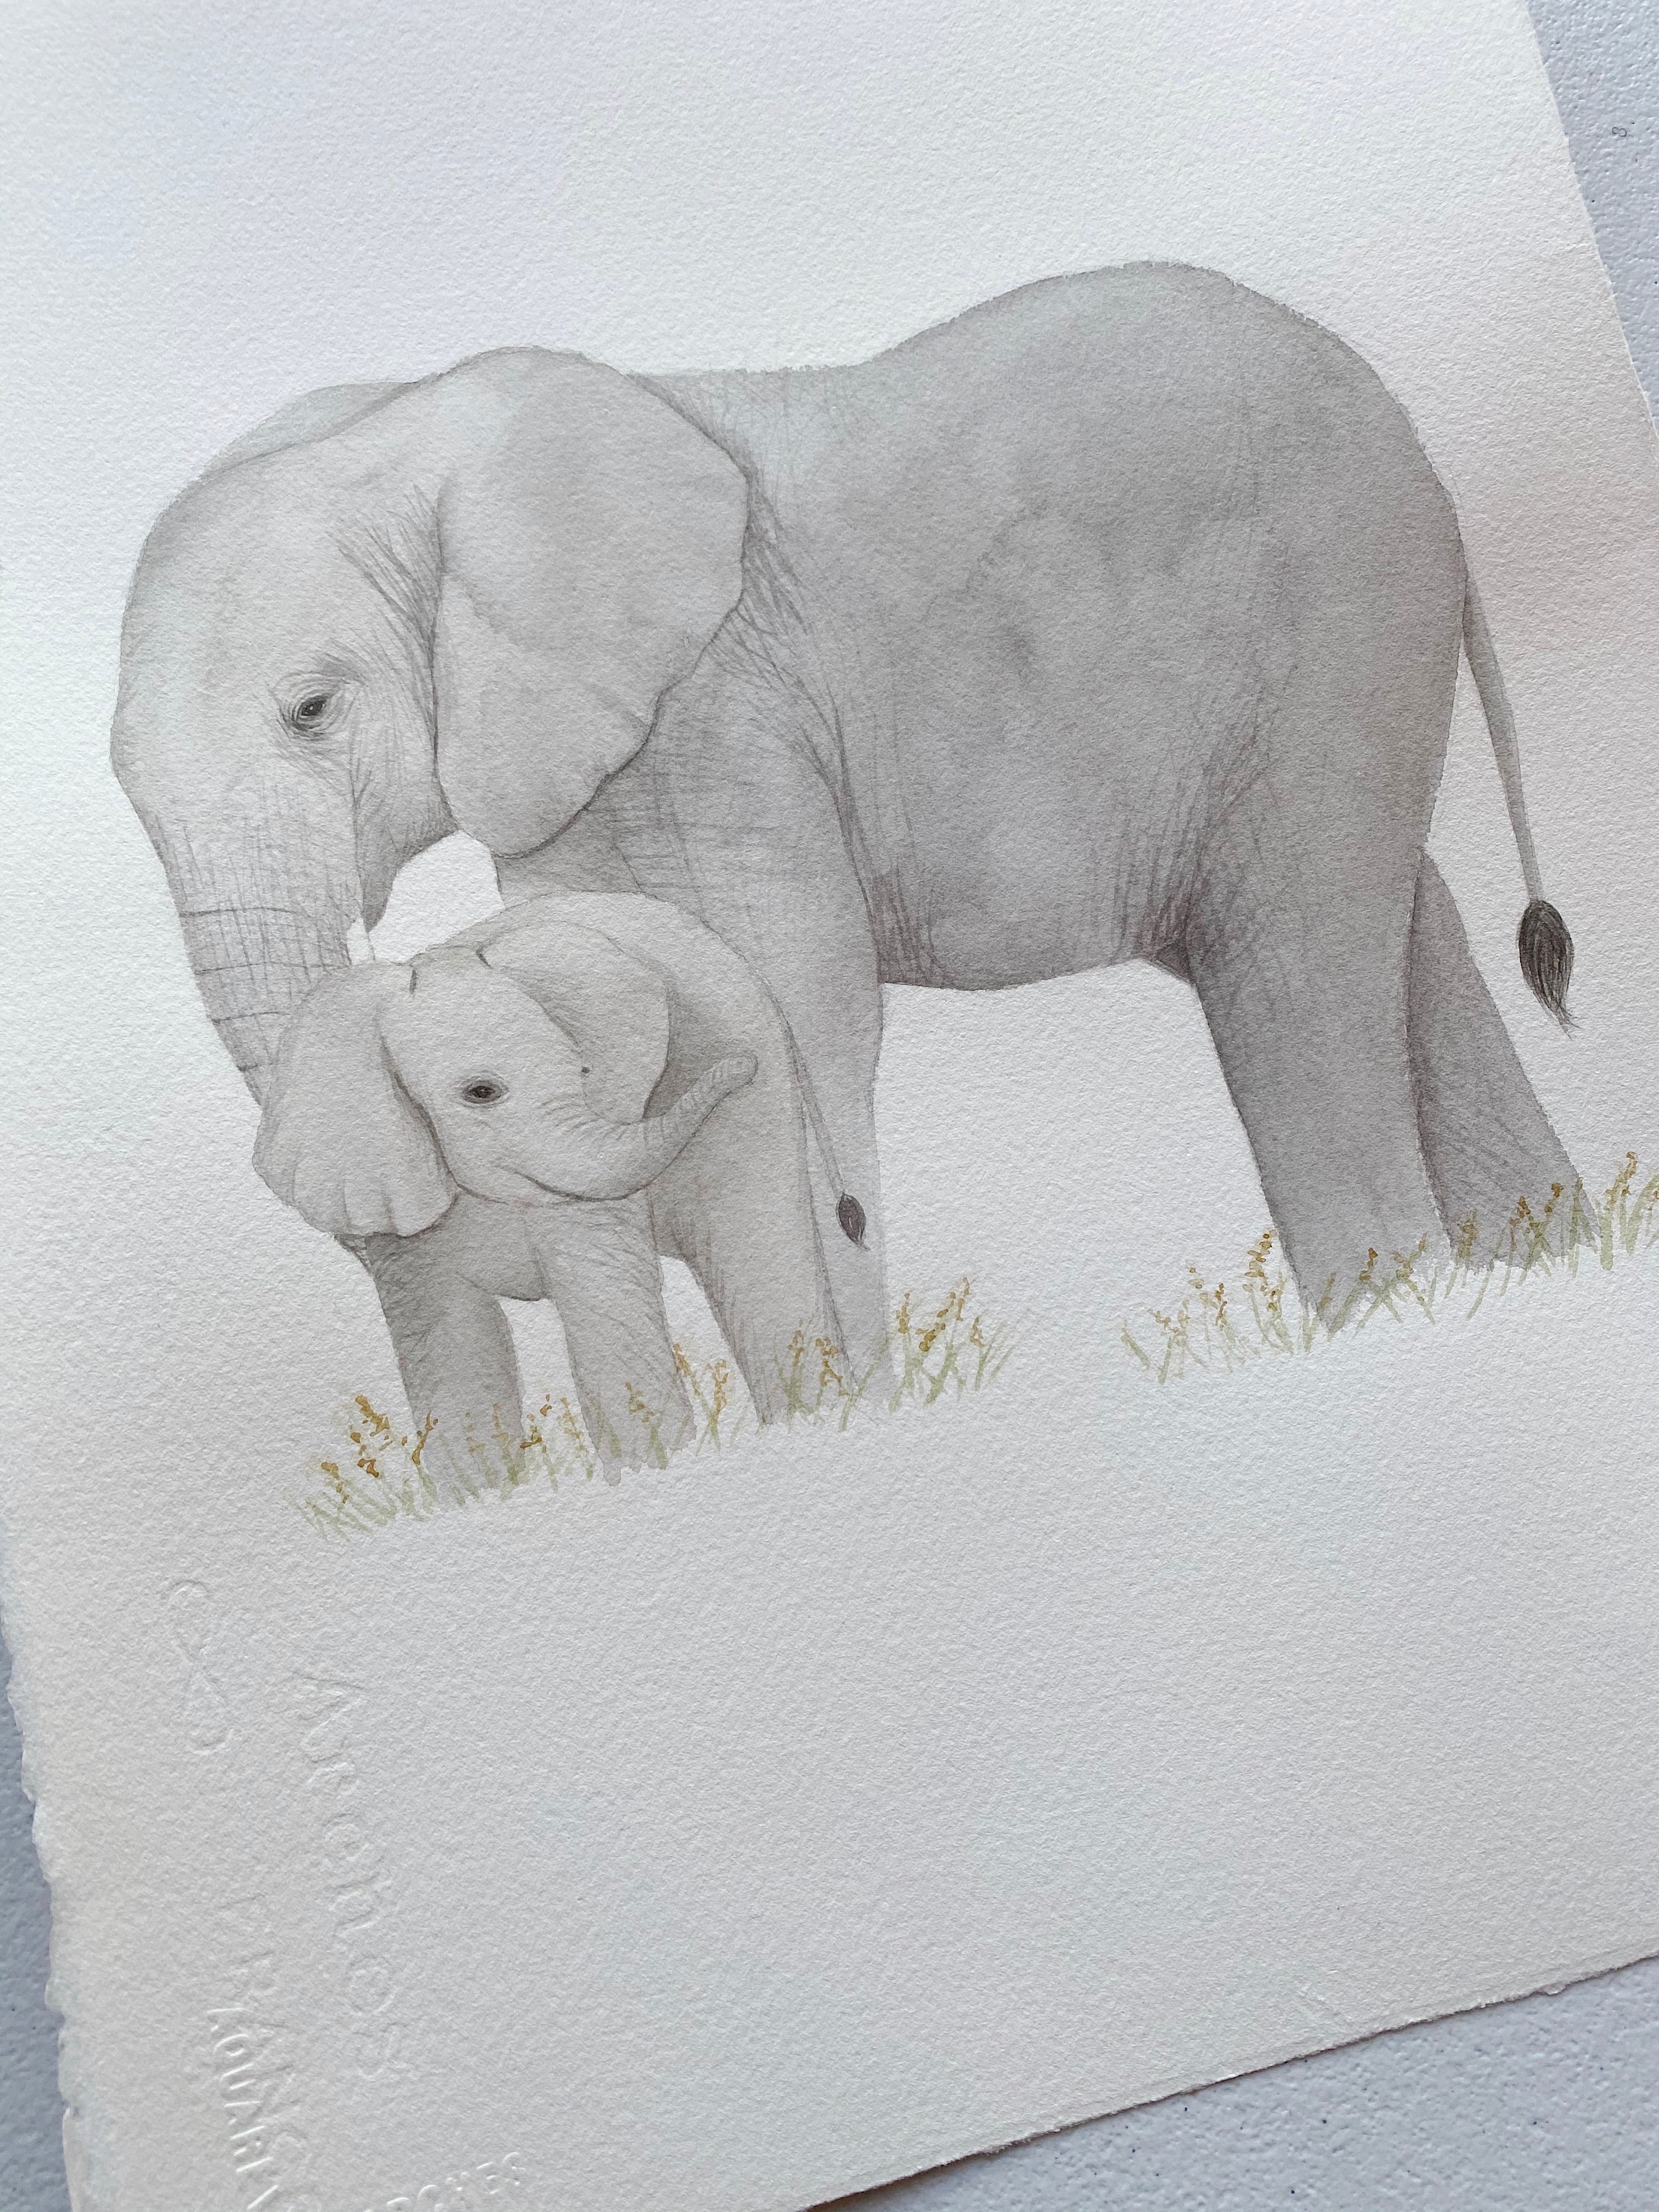 Original Painting - Watercolor Elephant & Baby Painting 11x15 inches